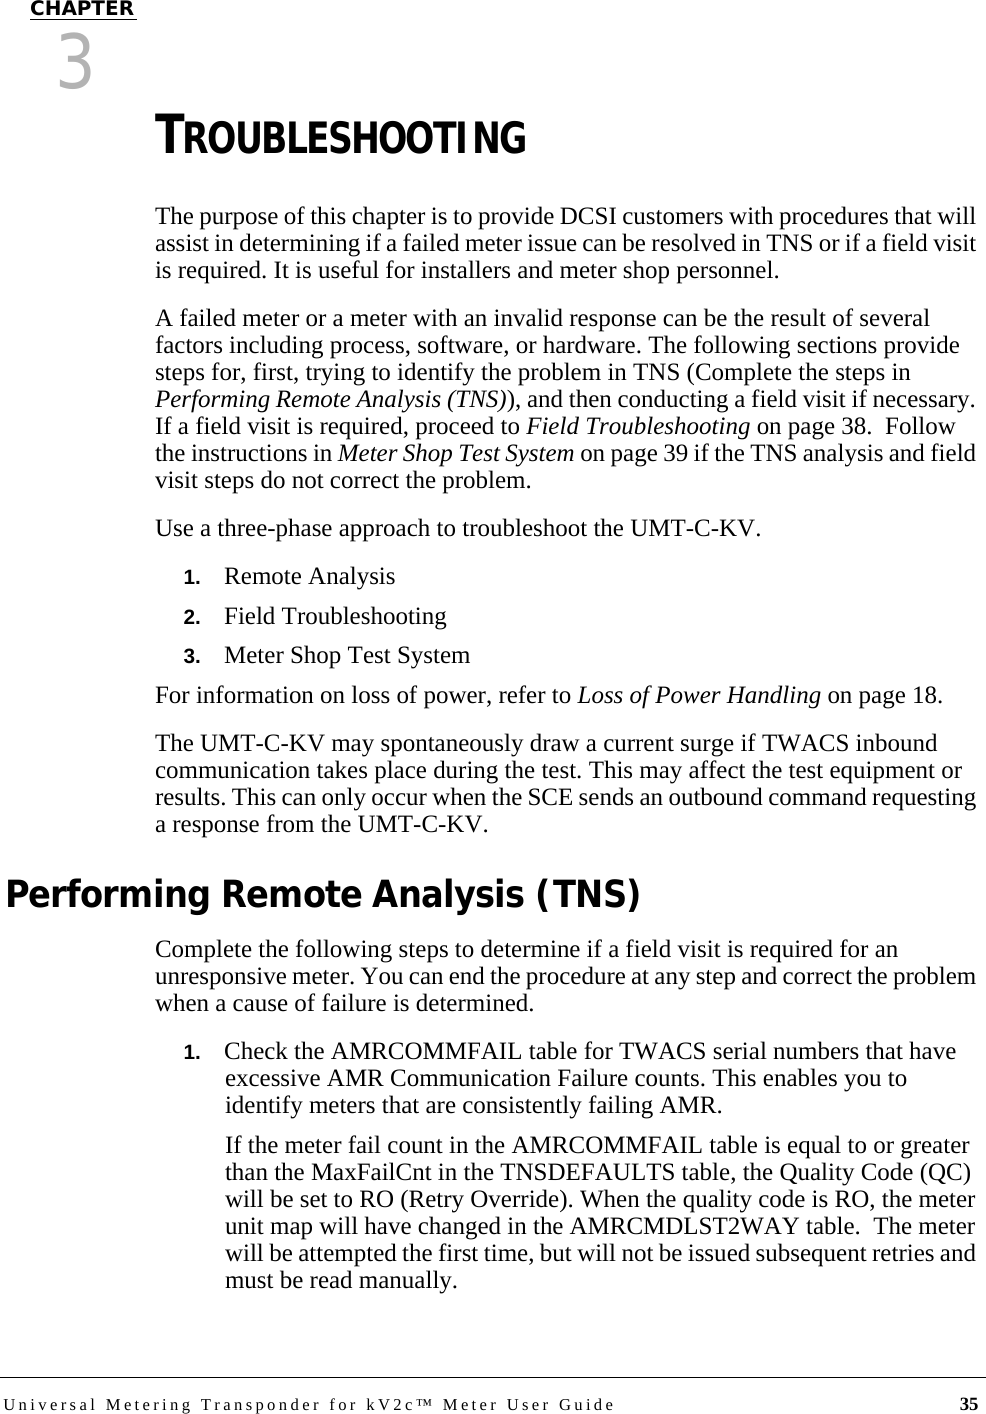 Universal Metering Transponder for kV2c™ Meter User Guide 35CHAPTER3TROUBLESHOOTING The purpose of this chapter is to provide DCSI customers with procedures that will assist in determining if a failed meter issue can be resolved in TNS or if a field visit is required. It is useful for installers and meter shop personnel.A failed meter or a meter with an invalid response can be the result of several factors including process, software, or hardware. The following sections provide steps for, first, trying to identify the problem in TNS (Complete the steps in Performing Remote Analysis (TNS)), and then conducting a field visit if necessary. If a field visit is required, proceed to Field Troubleshooting on page 38.  Follow the instructions in Meter Shop Test System on page 39 if the TNS analysis and field visit steps do not correct the problem.Use a three-phase approach to troubleshoot the UMT-C-KV.1.   Remote Analysis2.   Field Troubleshooting3.   Meter Shop Test SystemFor information on loss of power, refer to Loss of Power Handling on page 18. The UMT-C-KV may spontaneously draw a current surge if TWACS inbound communication takes place during the test. This may affect the test equipment or results. This can only occur when the SCE sends an outbound command requesting a response from the UMT-C-KV.Performing Remote Analysis (TNS)Complete the following steps to determine if a field visit is required for an unresponsive meter. You can end the procedure at any step and correct the problem when a cause of failure is determined.1.   Check the AMRCOMMFAIL table for TWACS serial numbers that have excessive AMR Communication Failure counts. This enables you to identify meters that are consistently failing AMR.If the meter fail count in the AMRCOMMFAIL table is equal to or greater than the MaxFailCnt in the TNSDEFAULTS table, the Quality Code (QC) will be set to RO (Retry Override). When the quality code is RO, the meter unit map will have changed in the AMRCMDLST2WAY table.  The meter will be attempted the first time, but will not be issued subsequent retries and must be read manually.